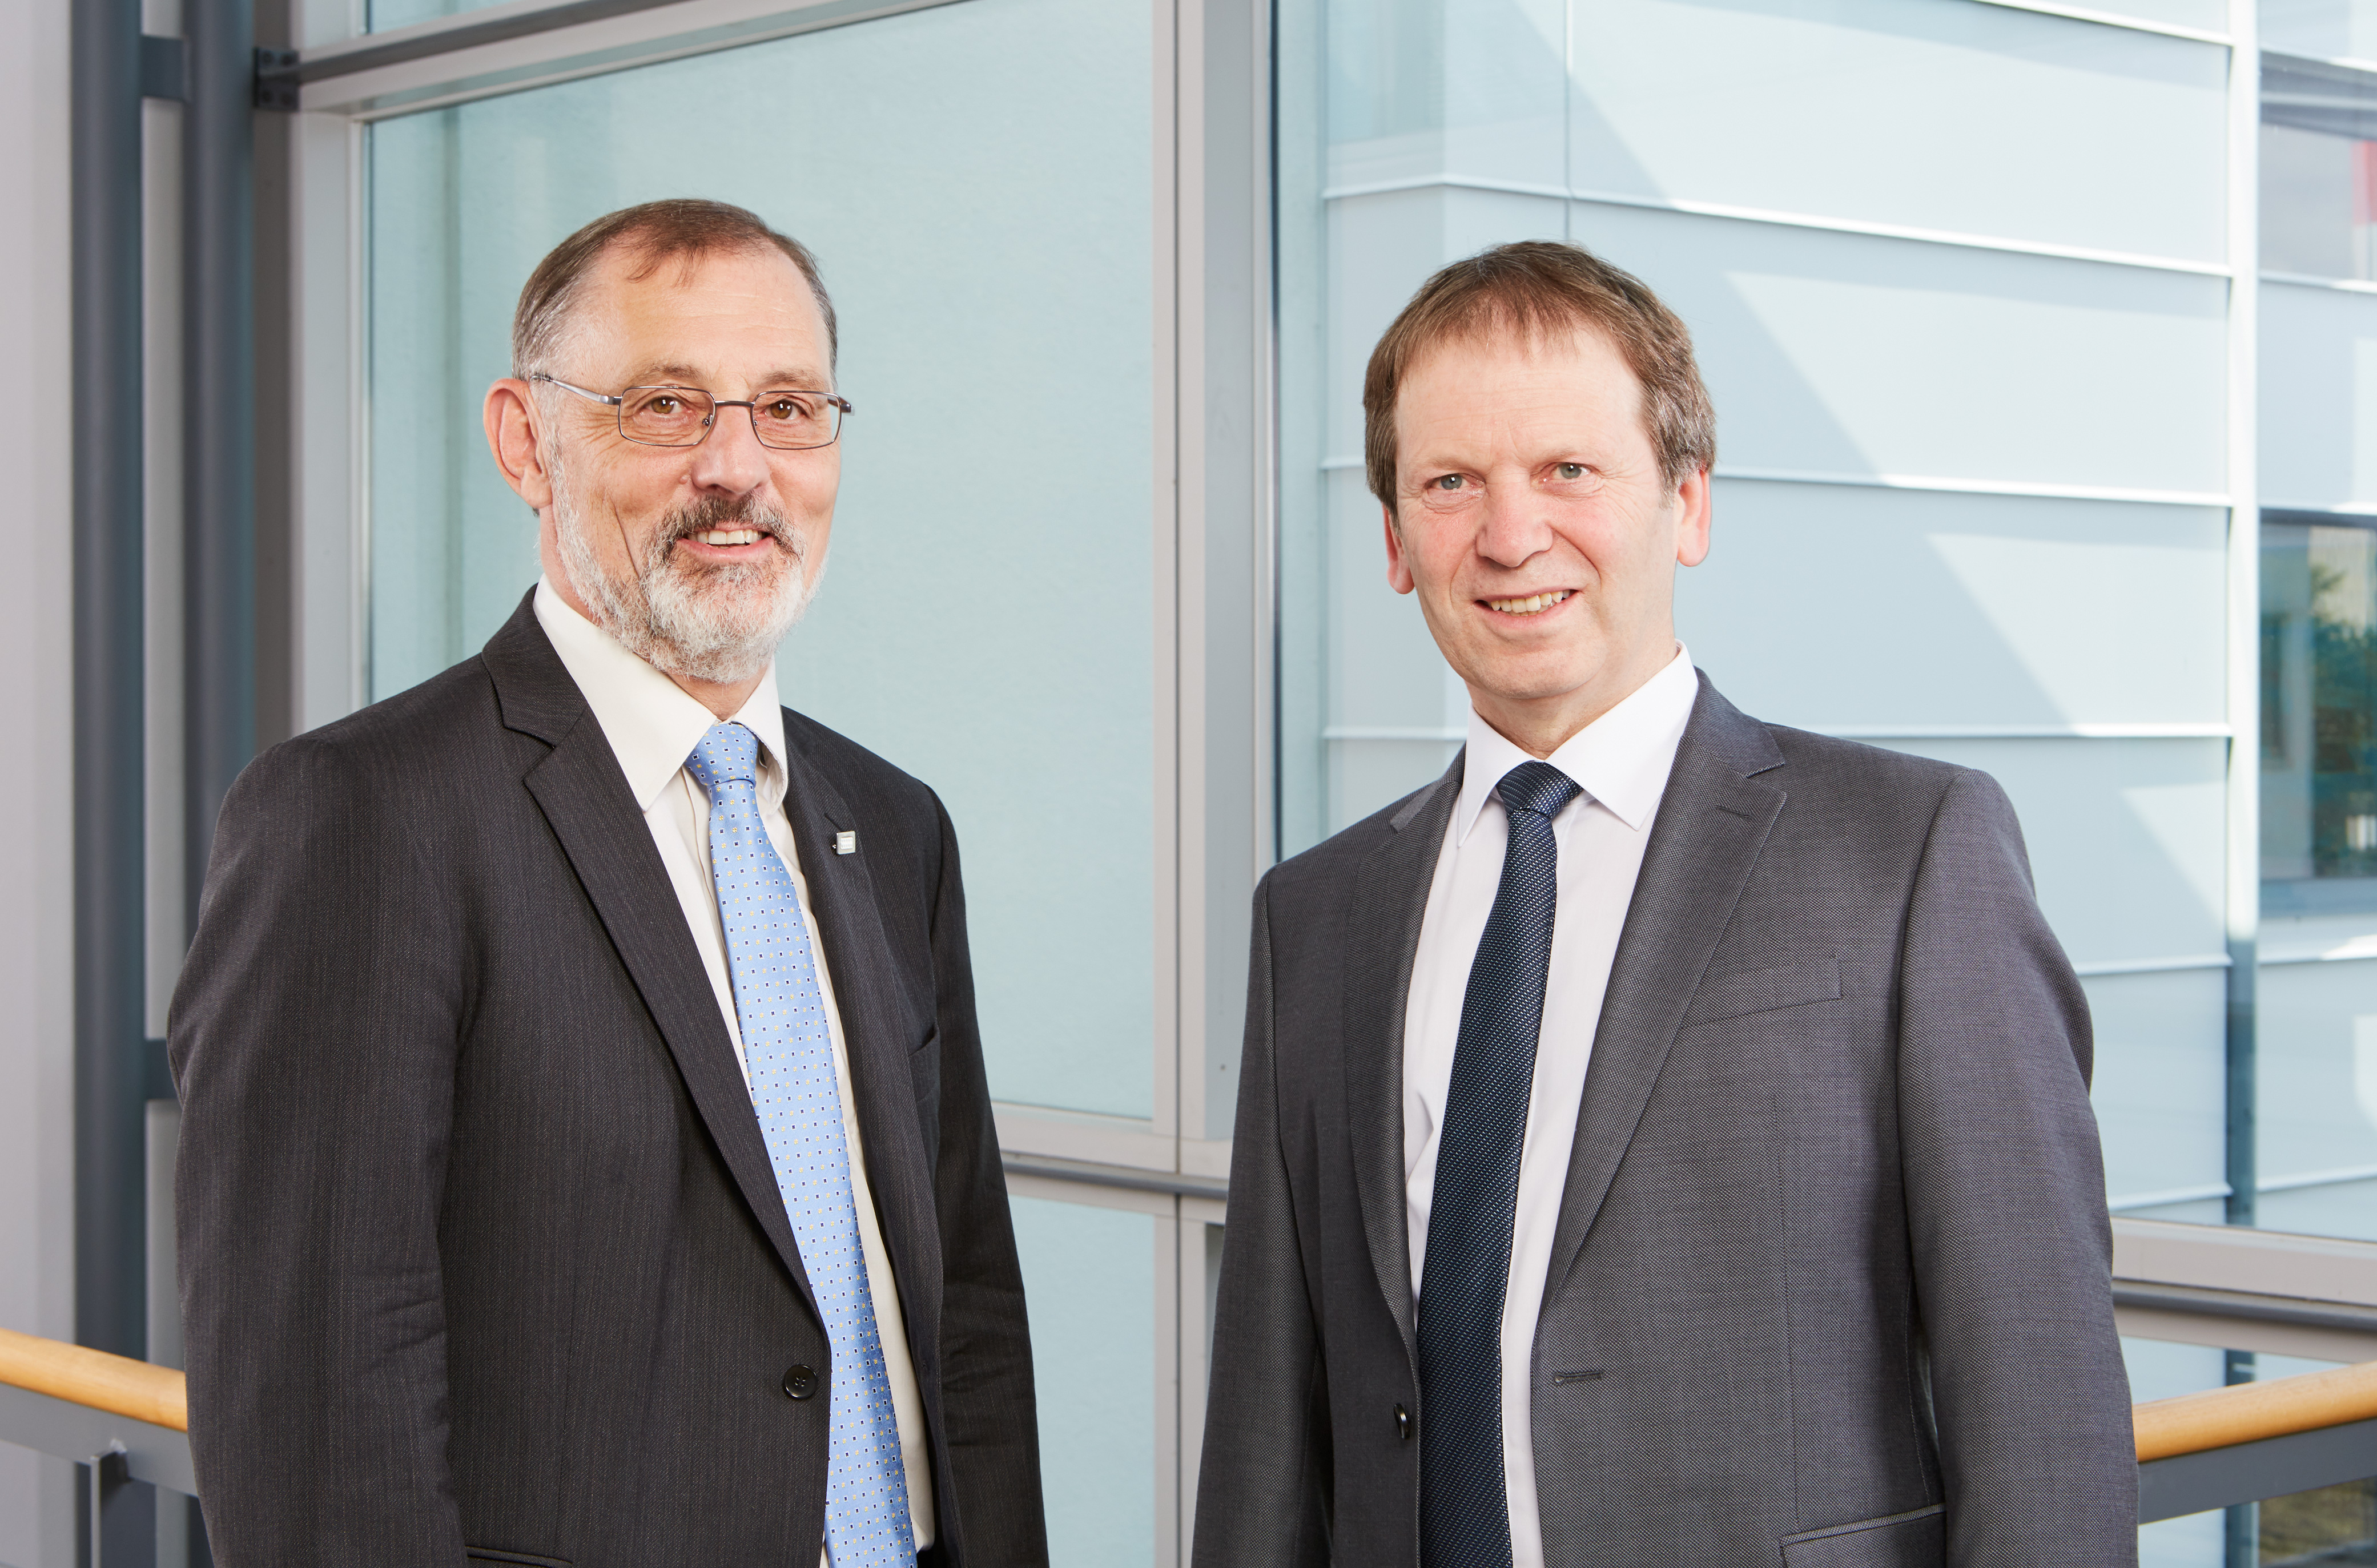 Two directors take over as head of Fraunhofer ISE